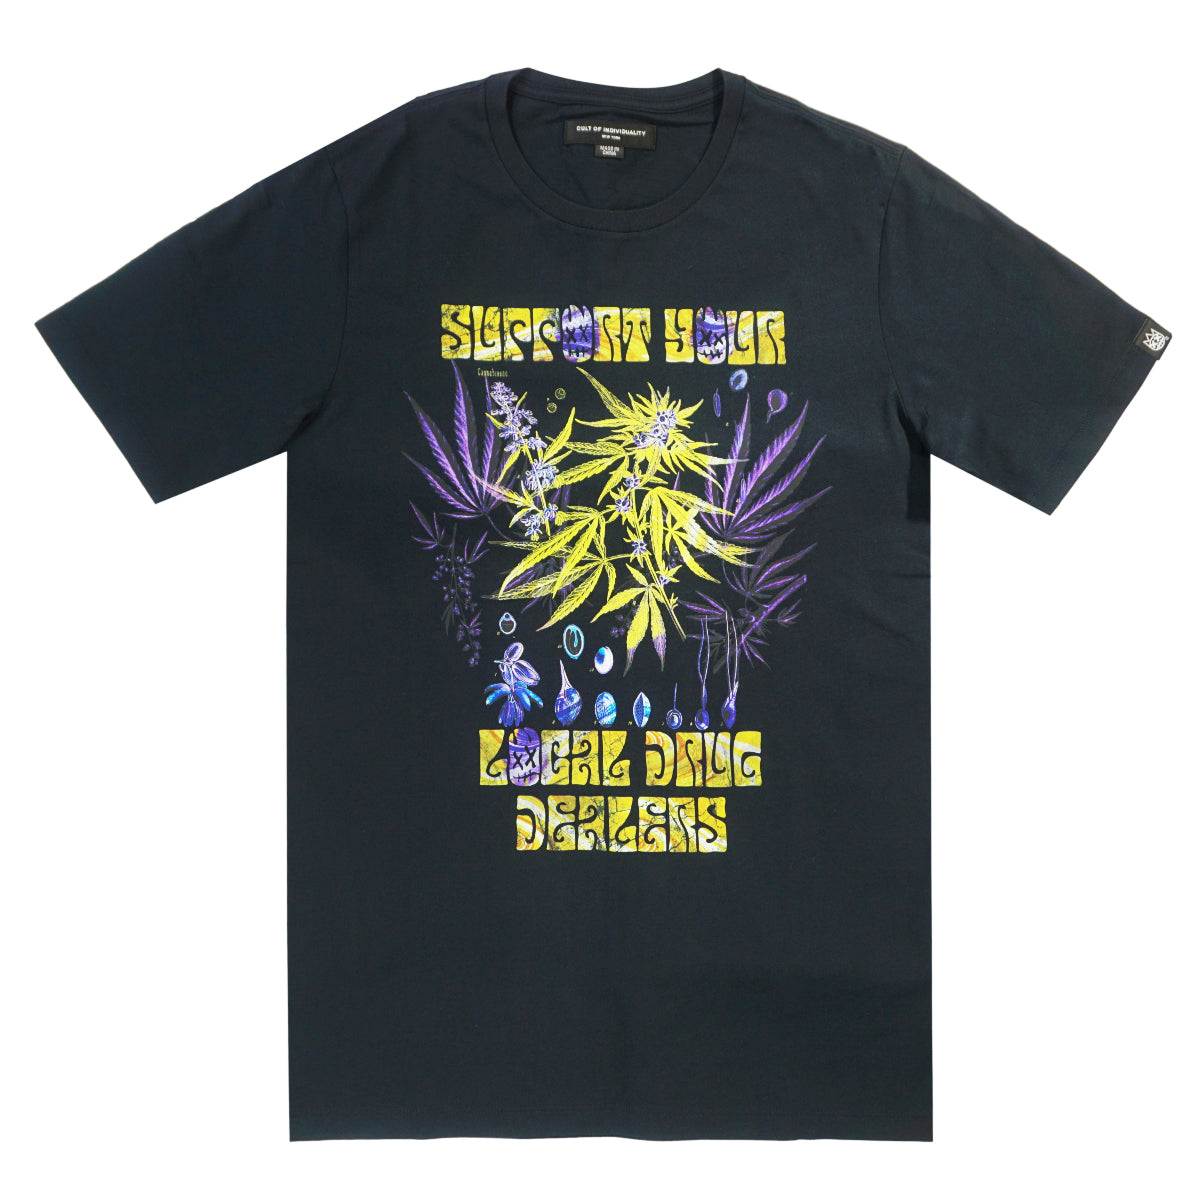 Men, Boys, Teens, Gifts, Wmns, Girls,Urban, Style, Fashion, Cult Of Individuality, Navy Tee, Lime Green, Purple, Cannabis, Plant, 